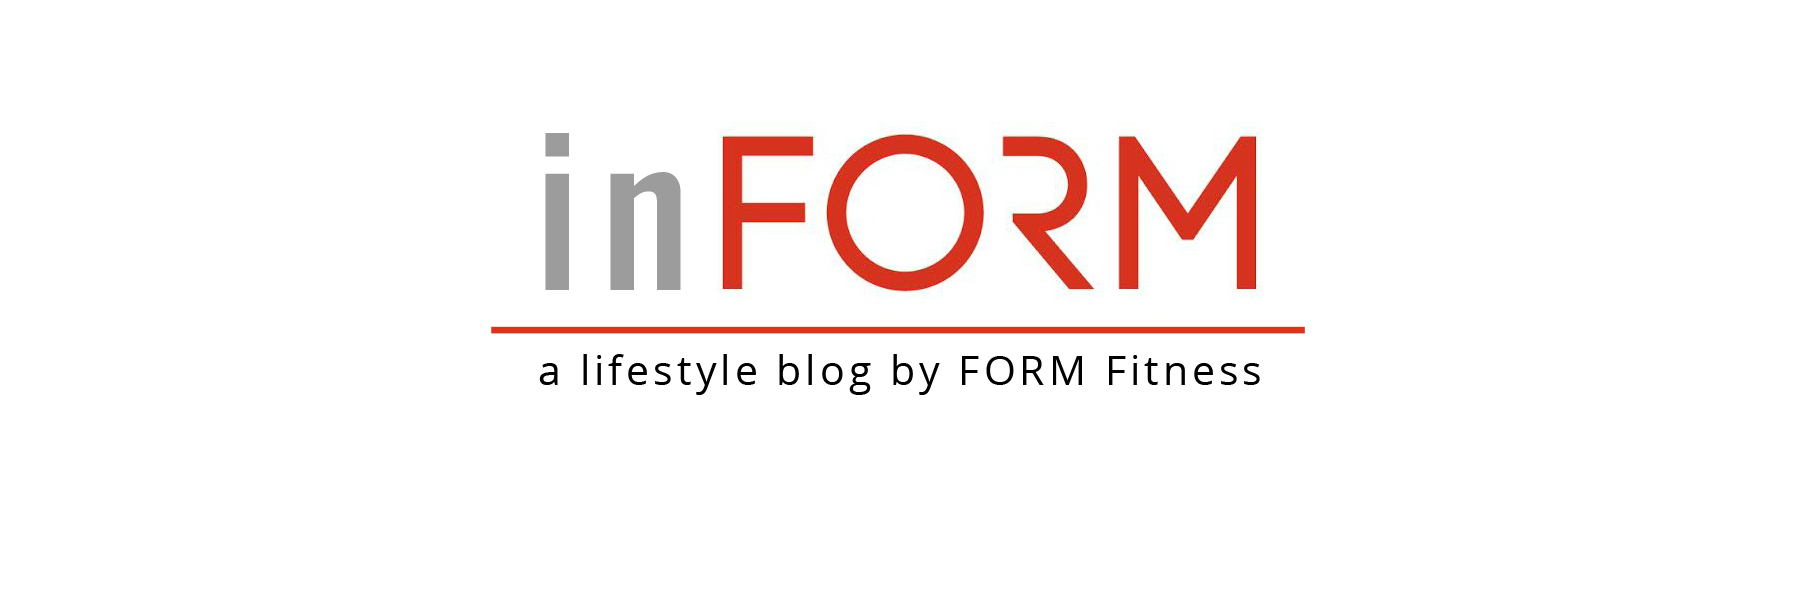  Form Fitness